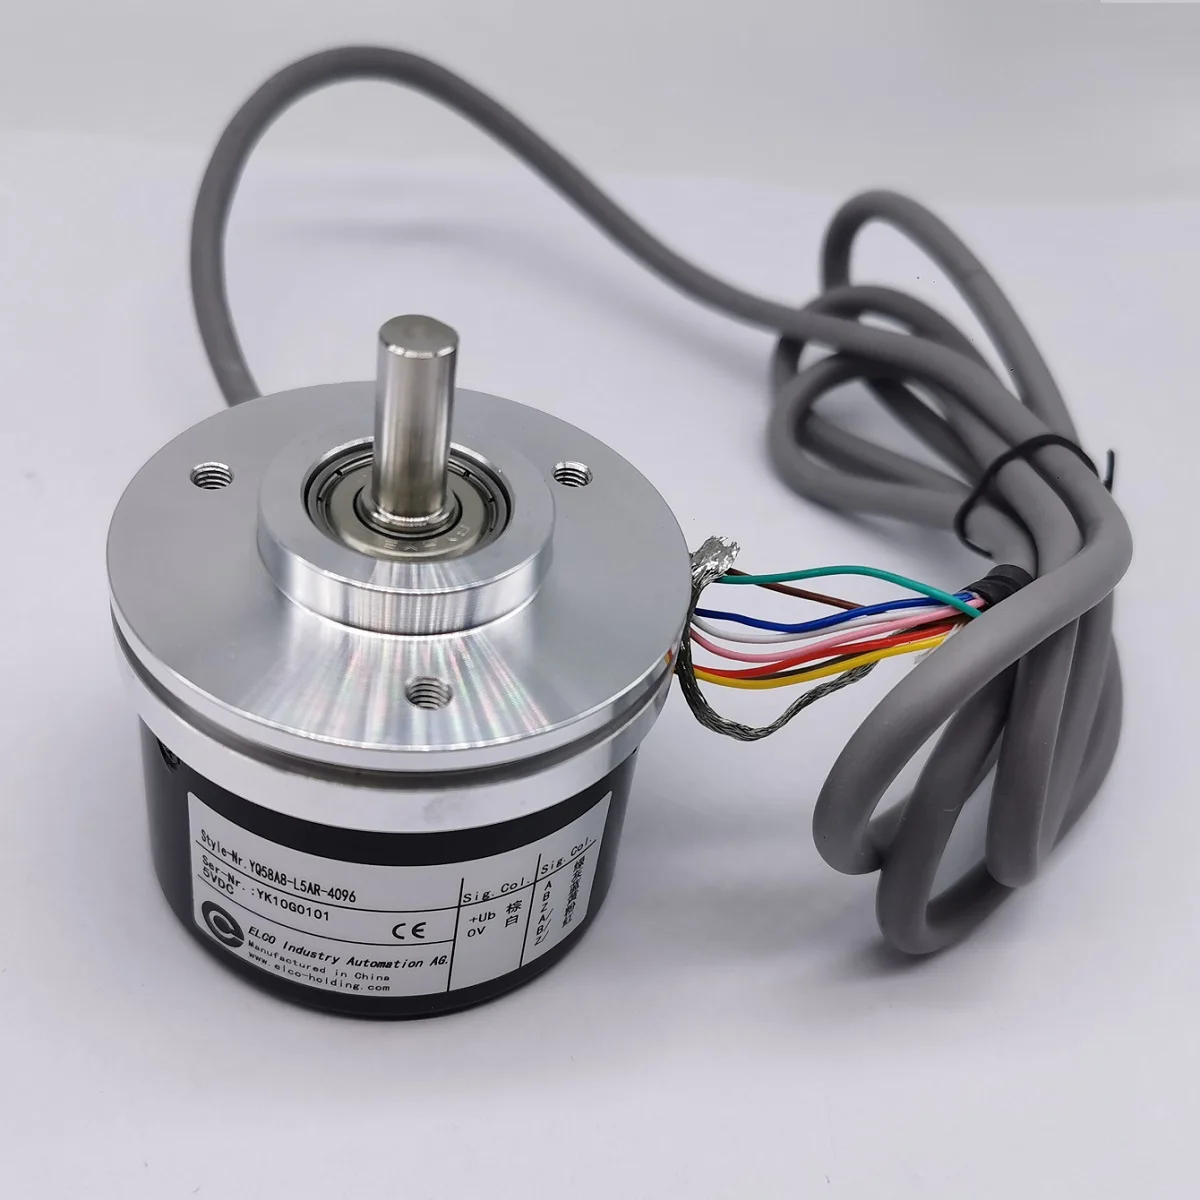 Details about   1PC PENON photoelectric rotary encoder EB38F8-L5HR-1000.4XBY00 5VDC New 